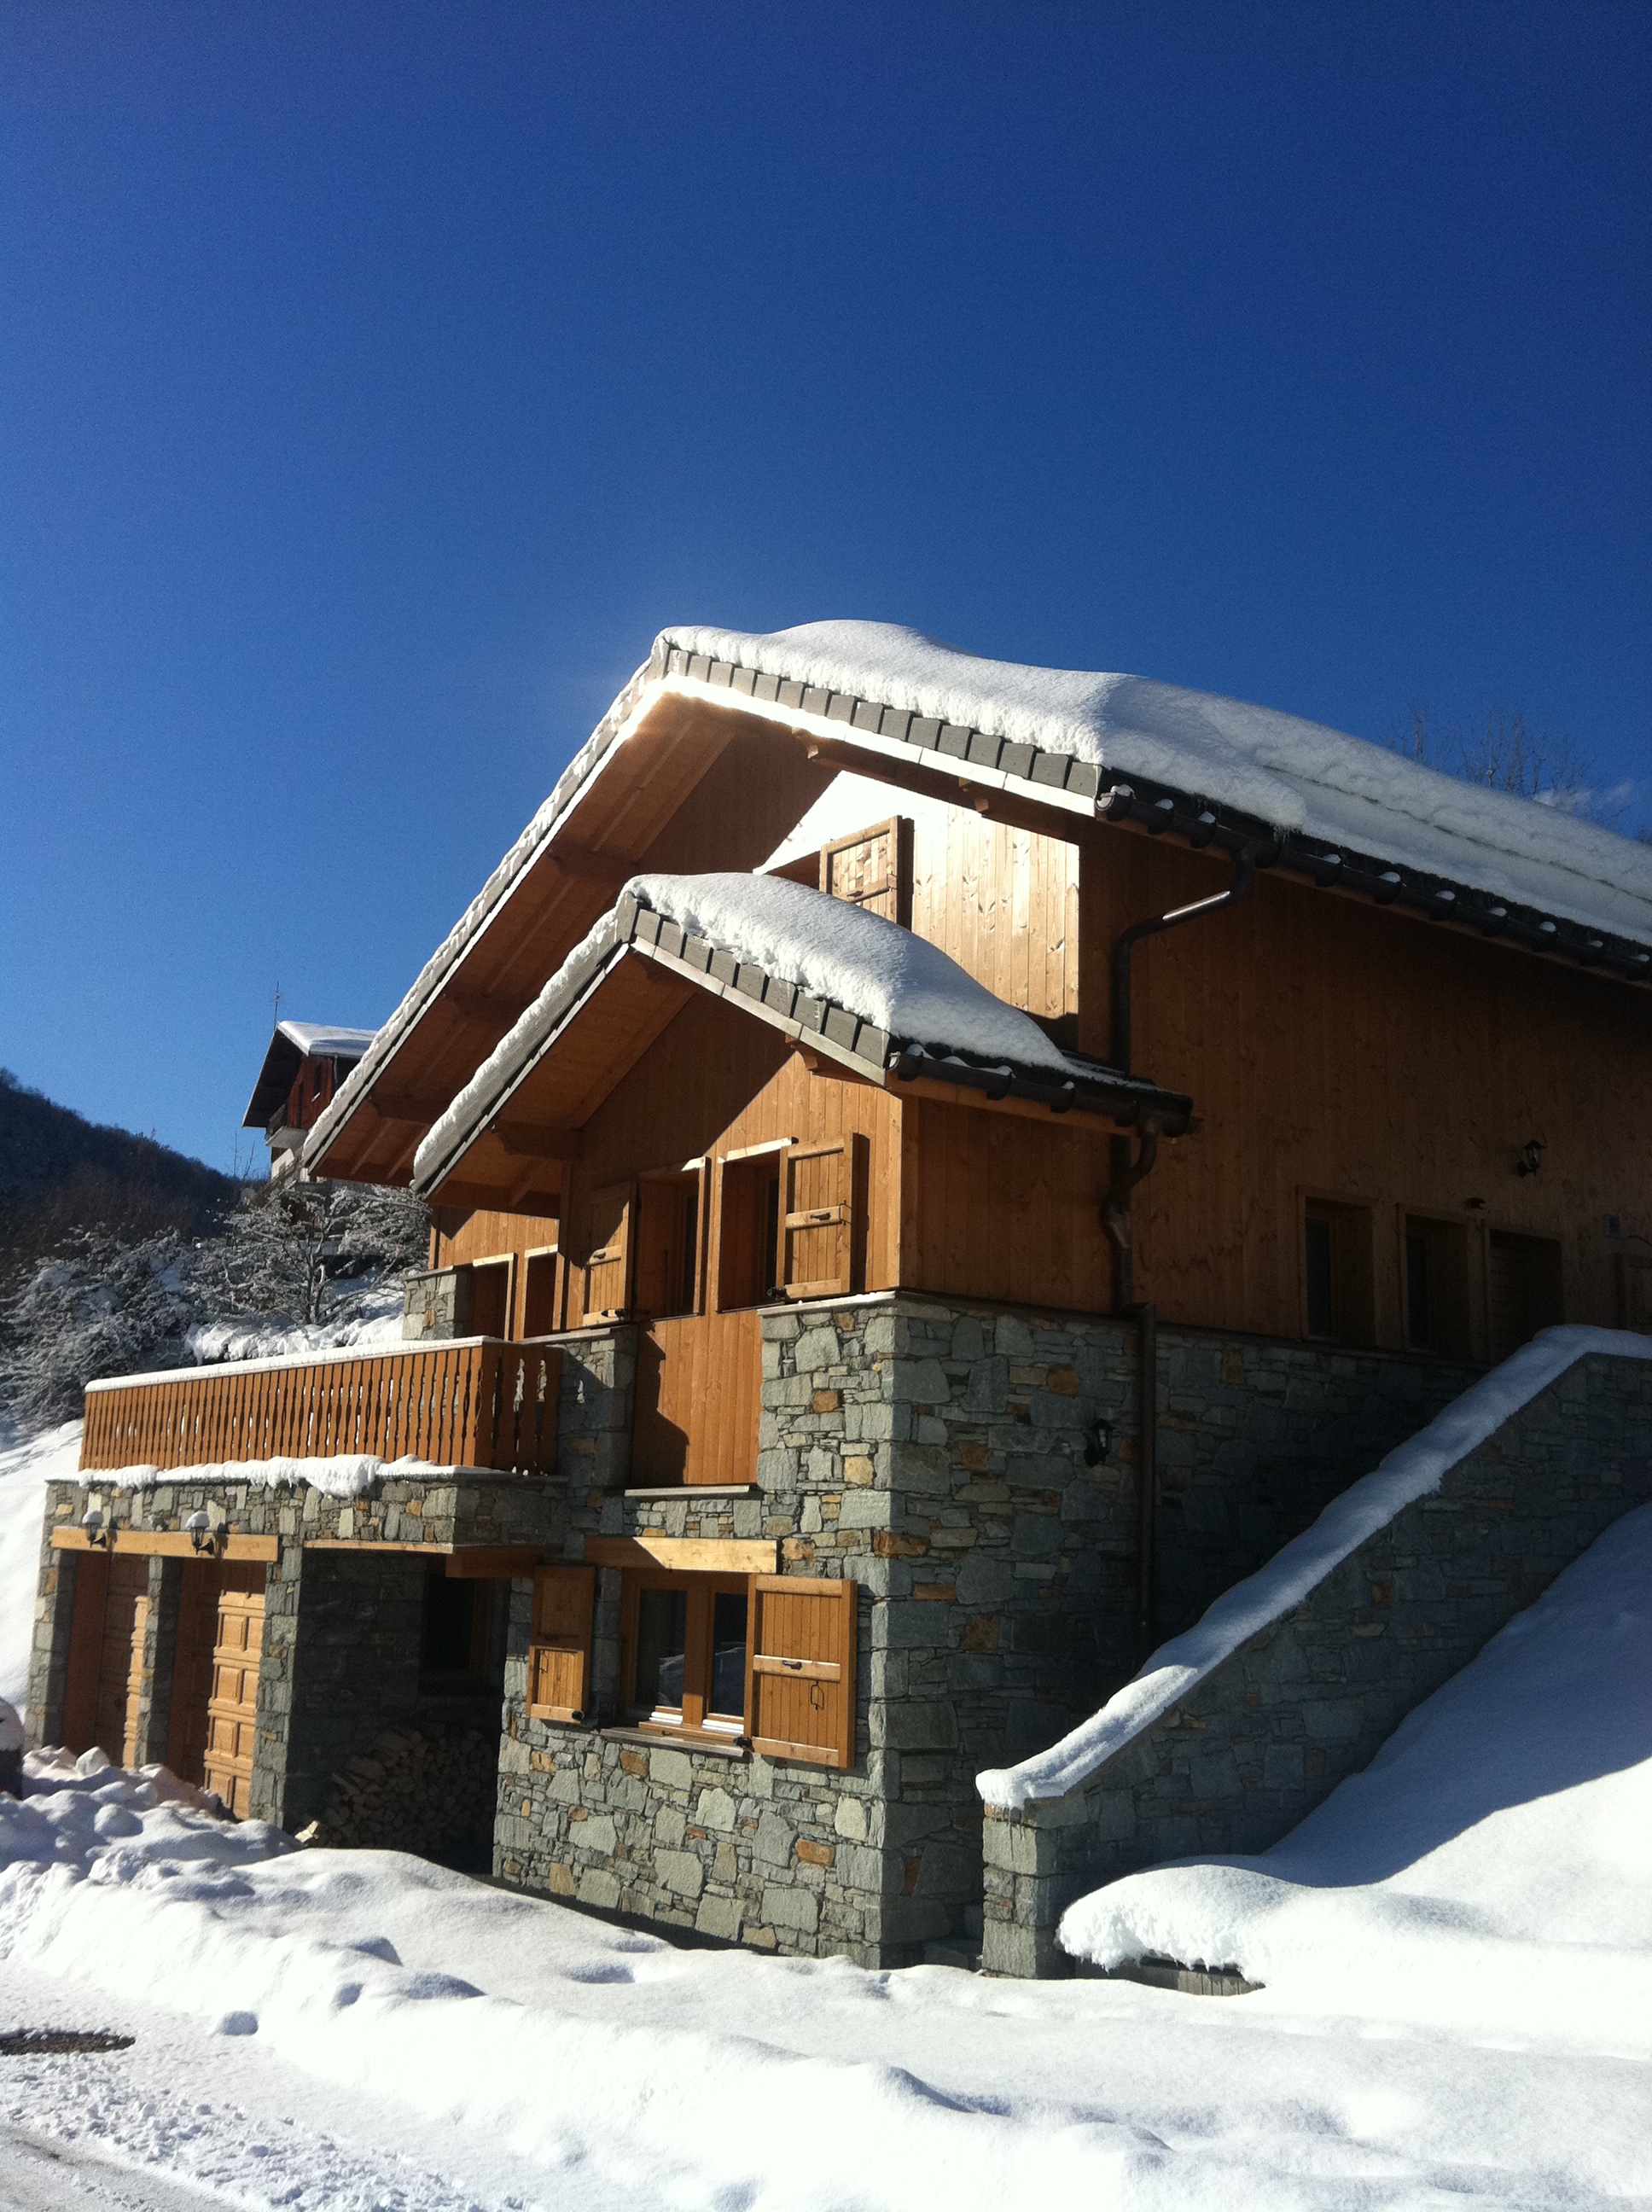 A Different Type of Holiday This Winter – A Ski Chalet